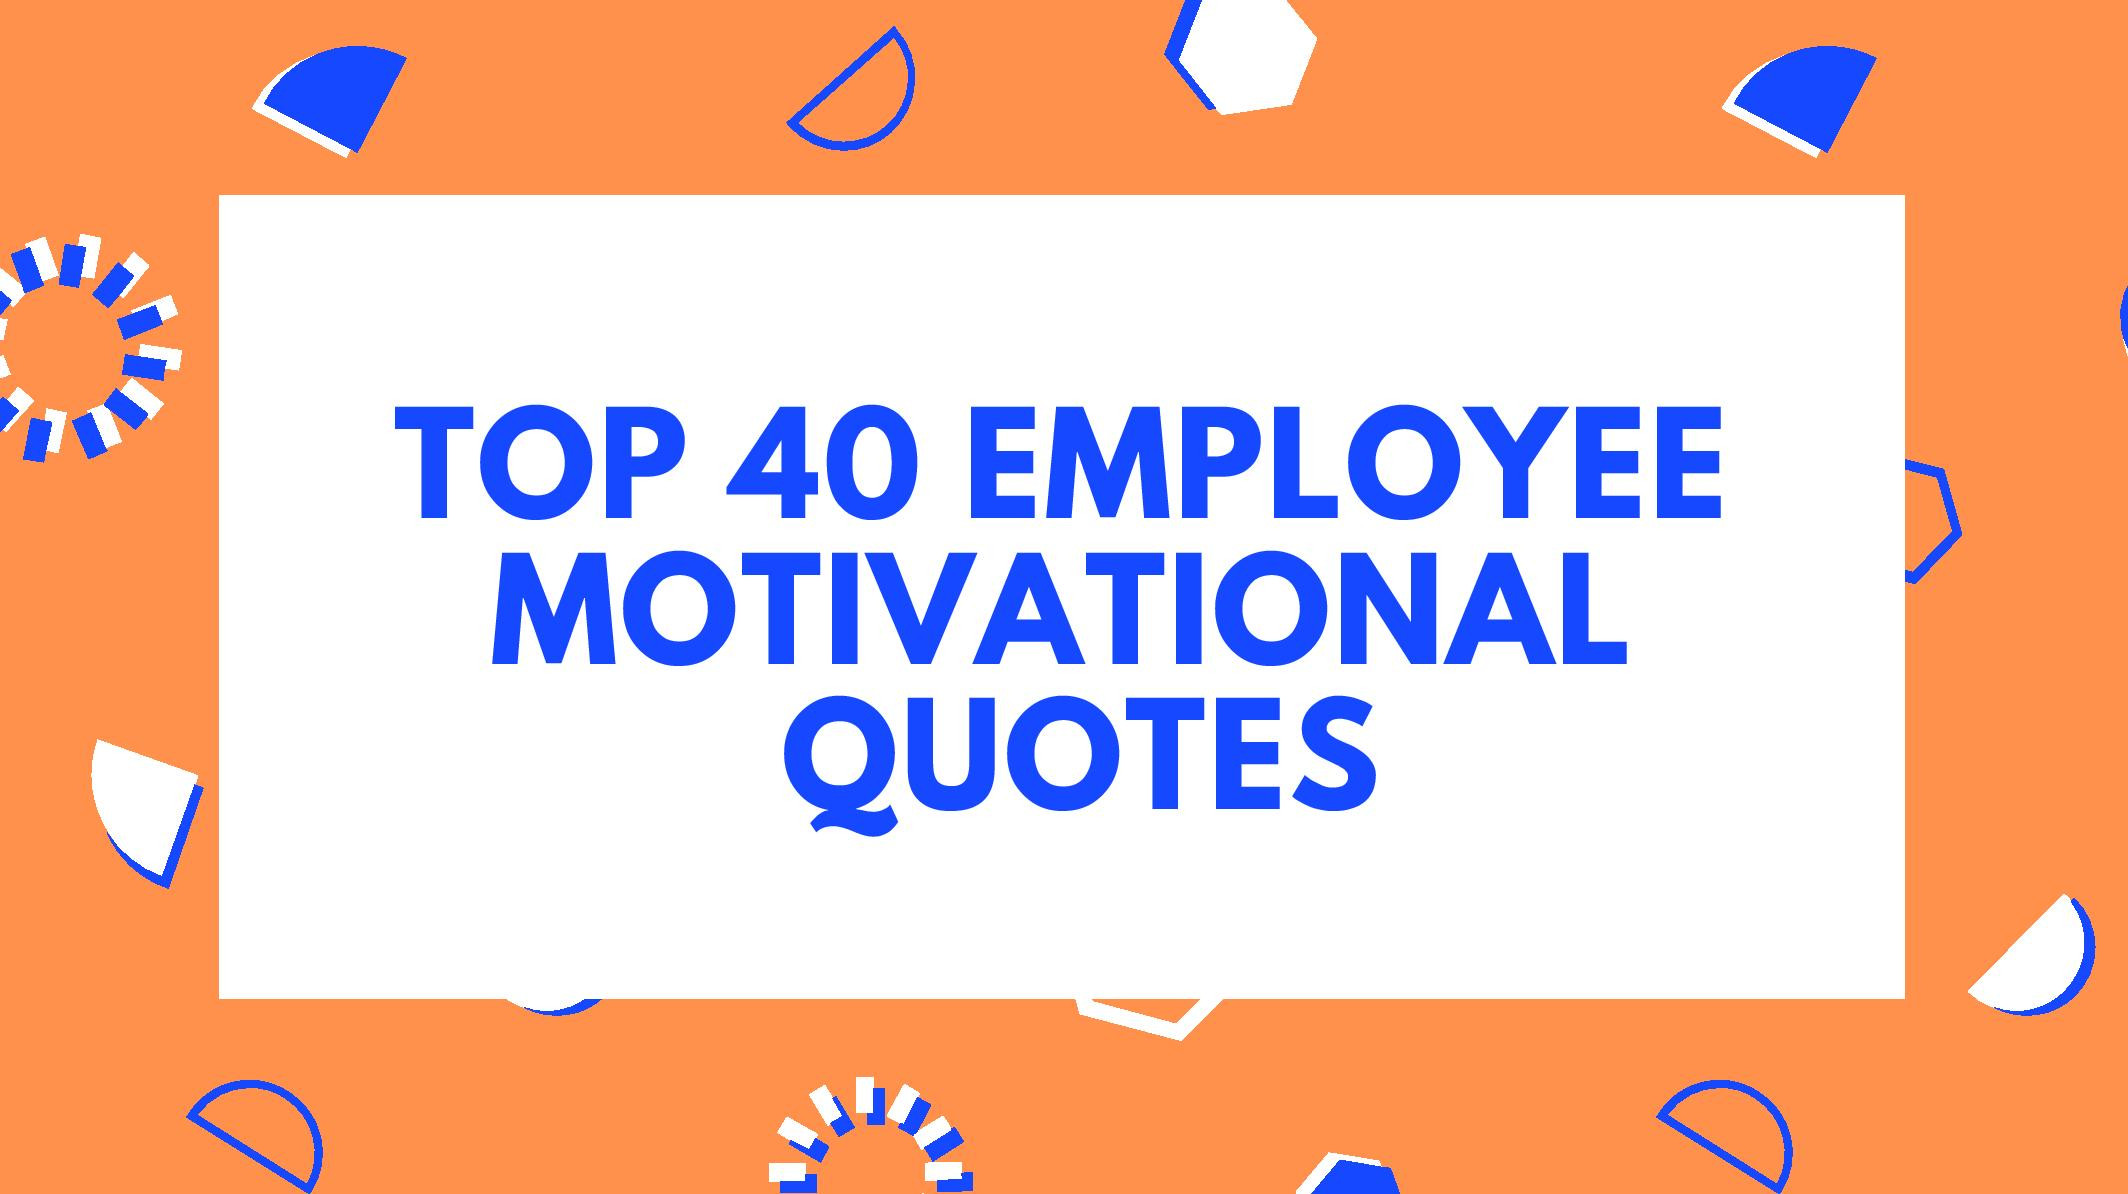 Inspirational Quotes For Employees
 Top 40 Employee Motivational Quotes To Inspire Your Workforce